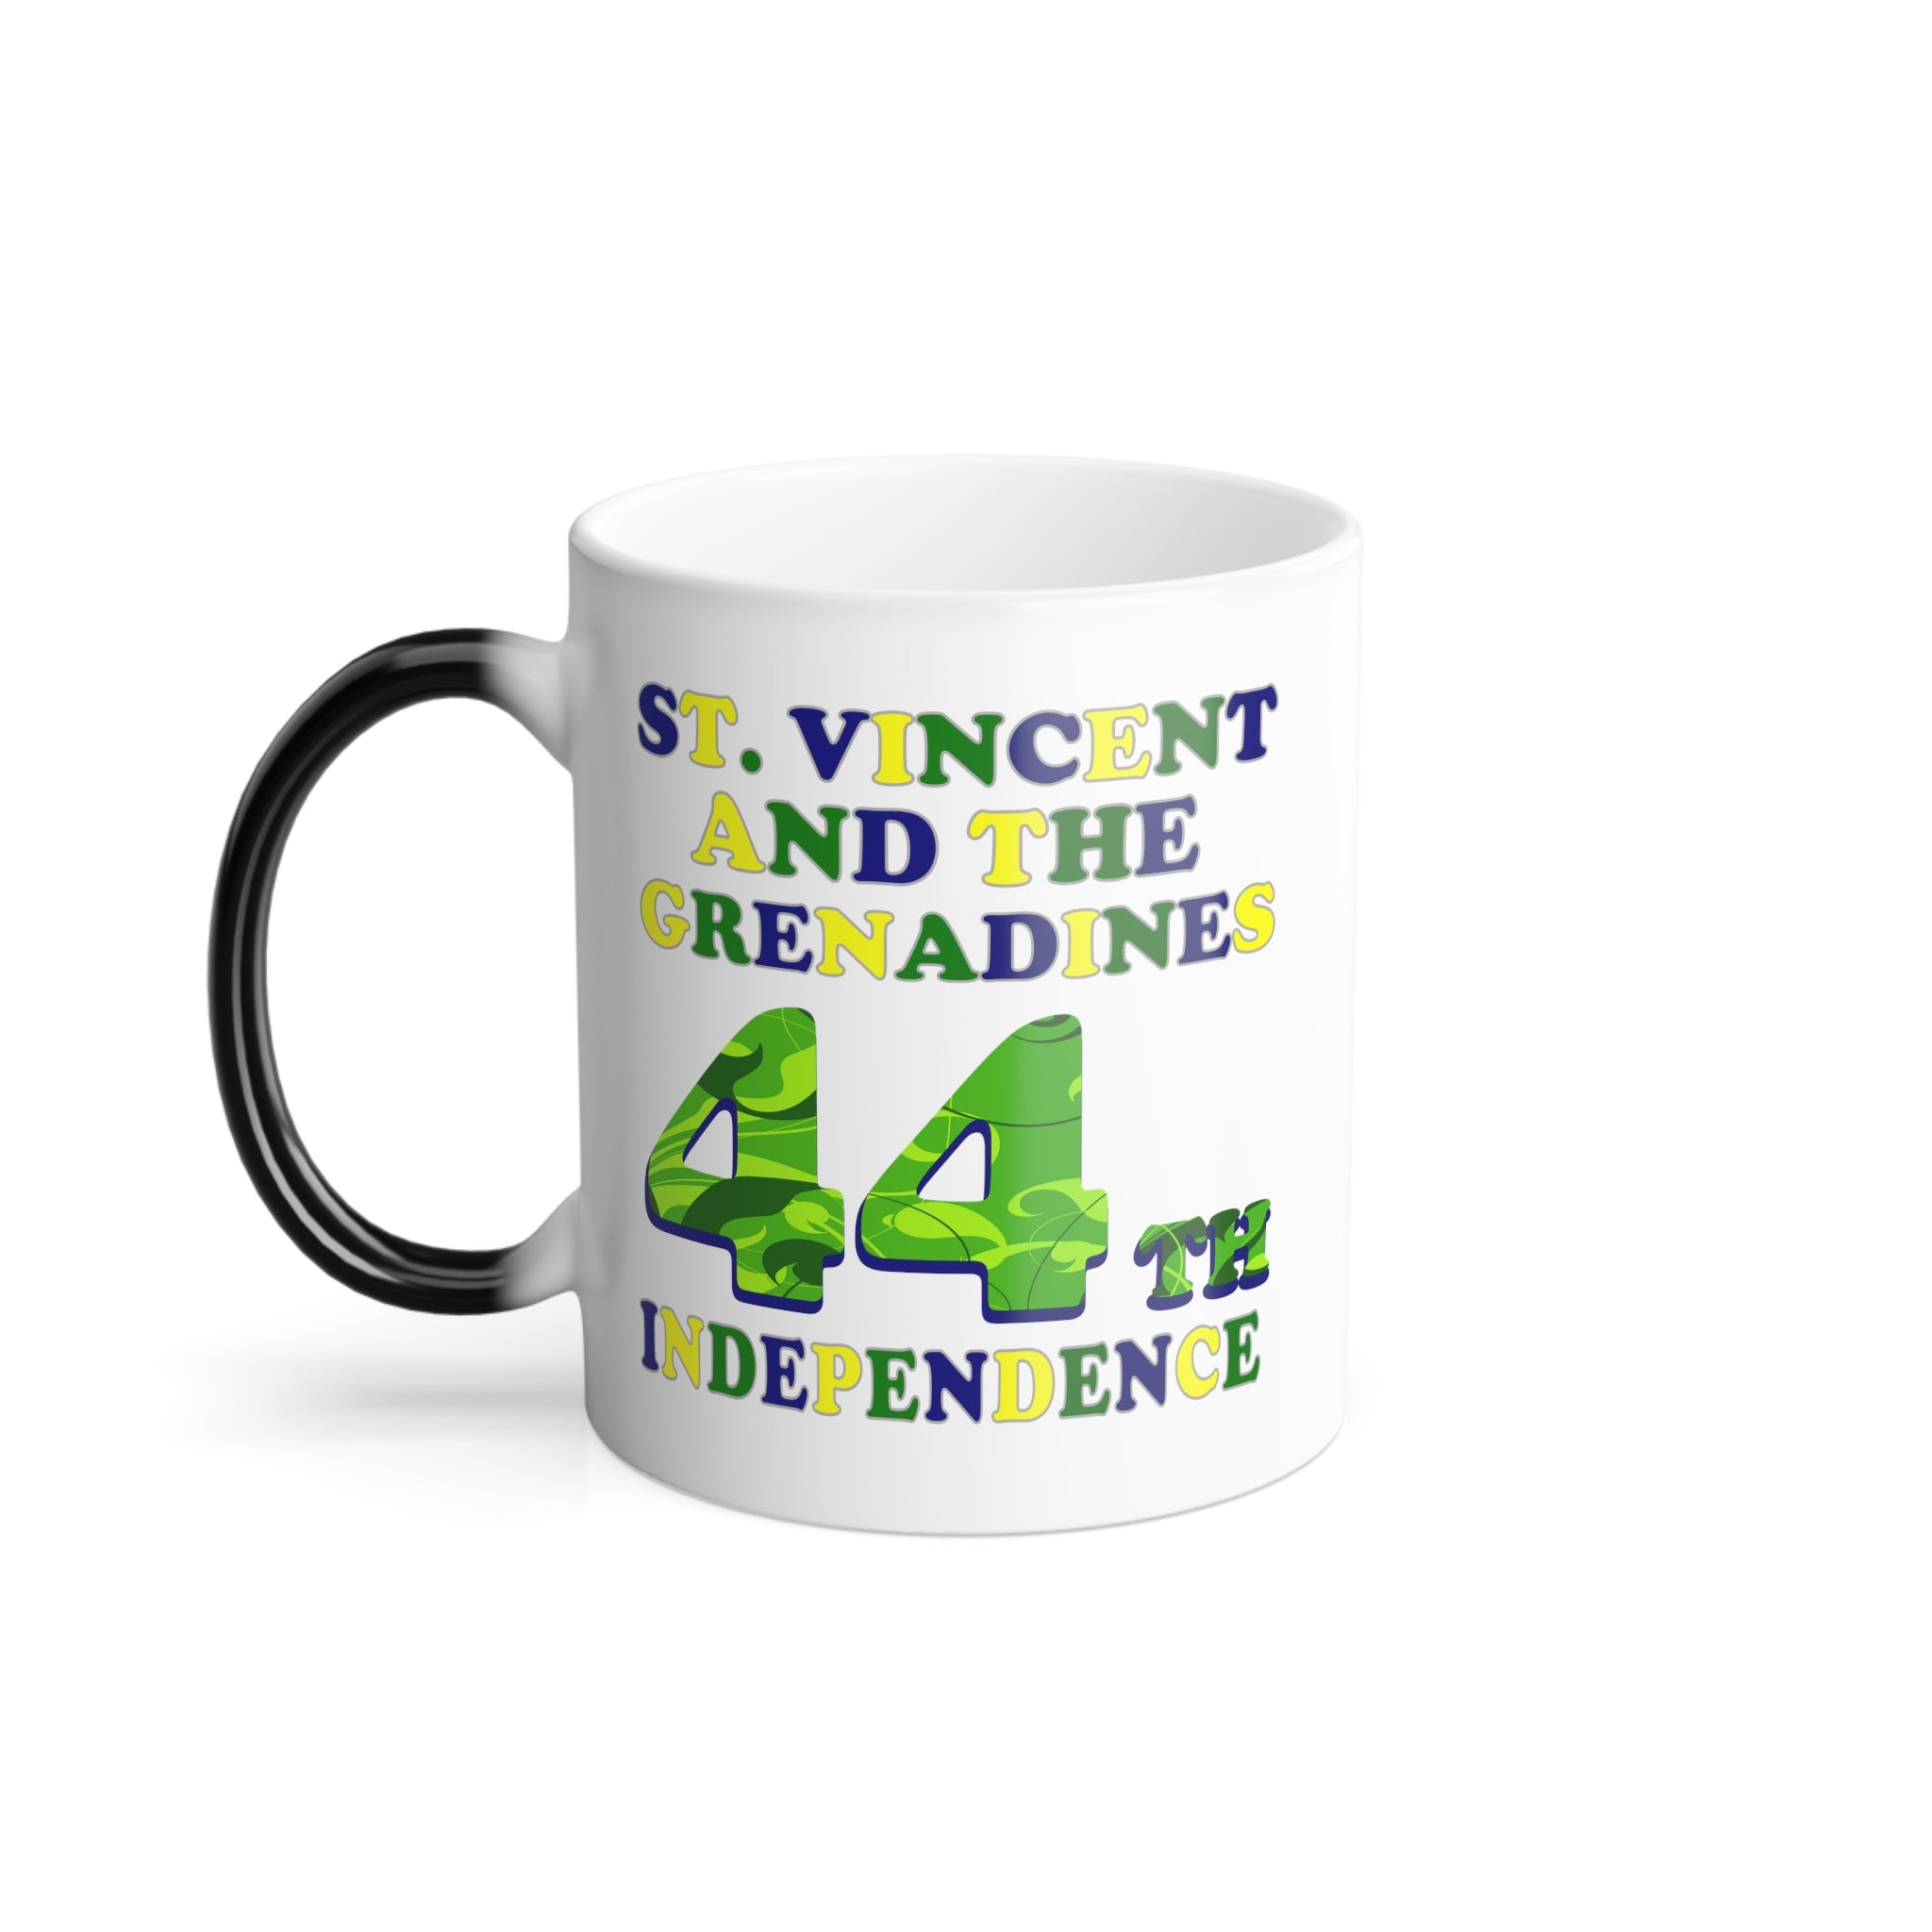 St. Vincent and the Grenadines 44th independence color changing mug